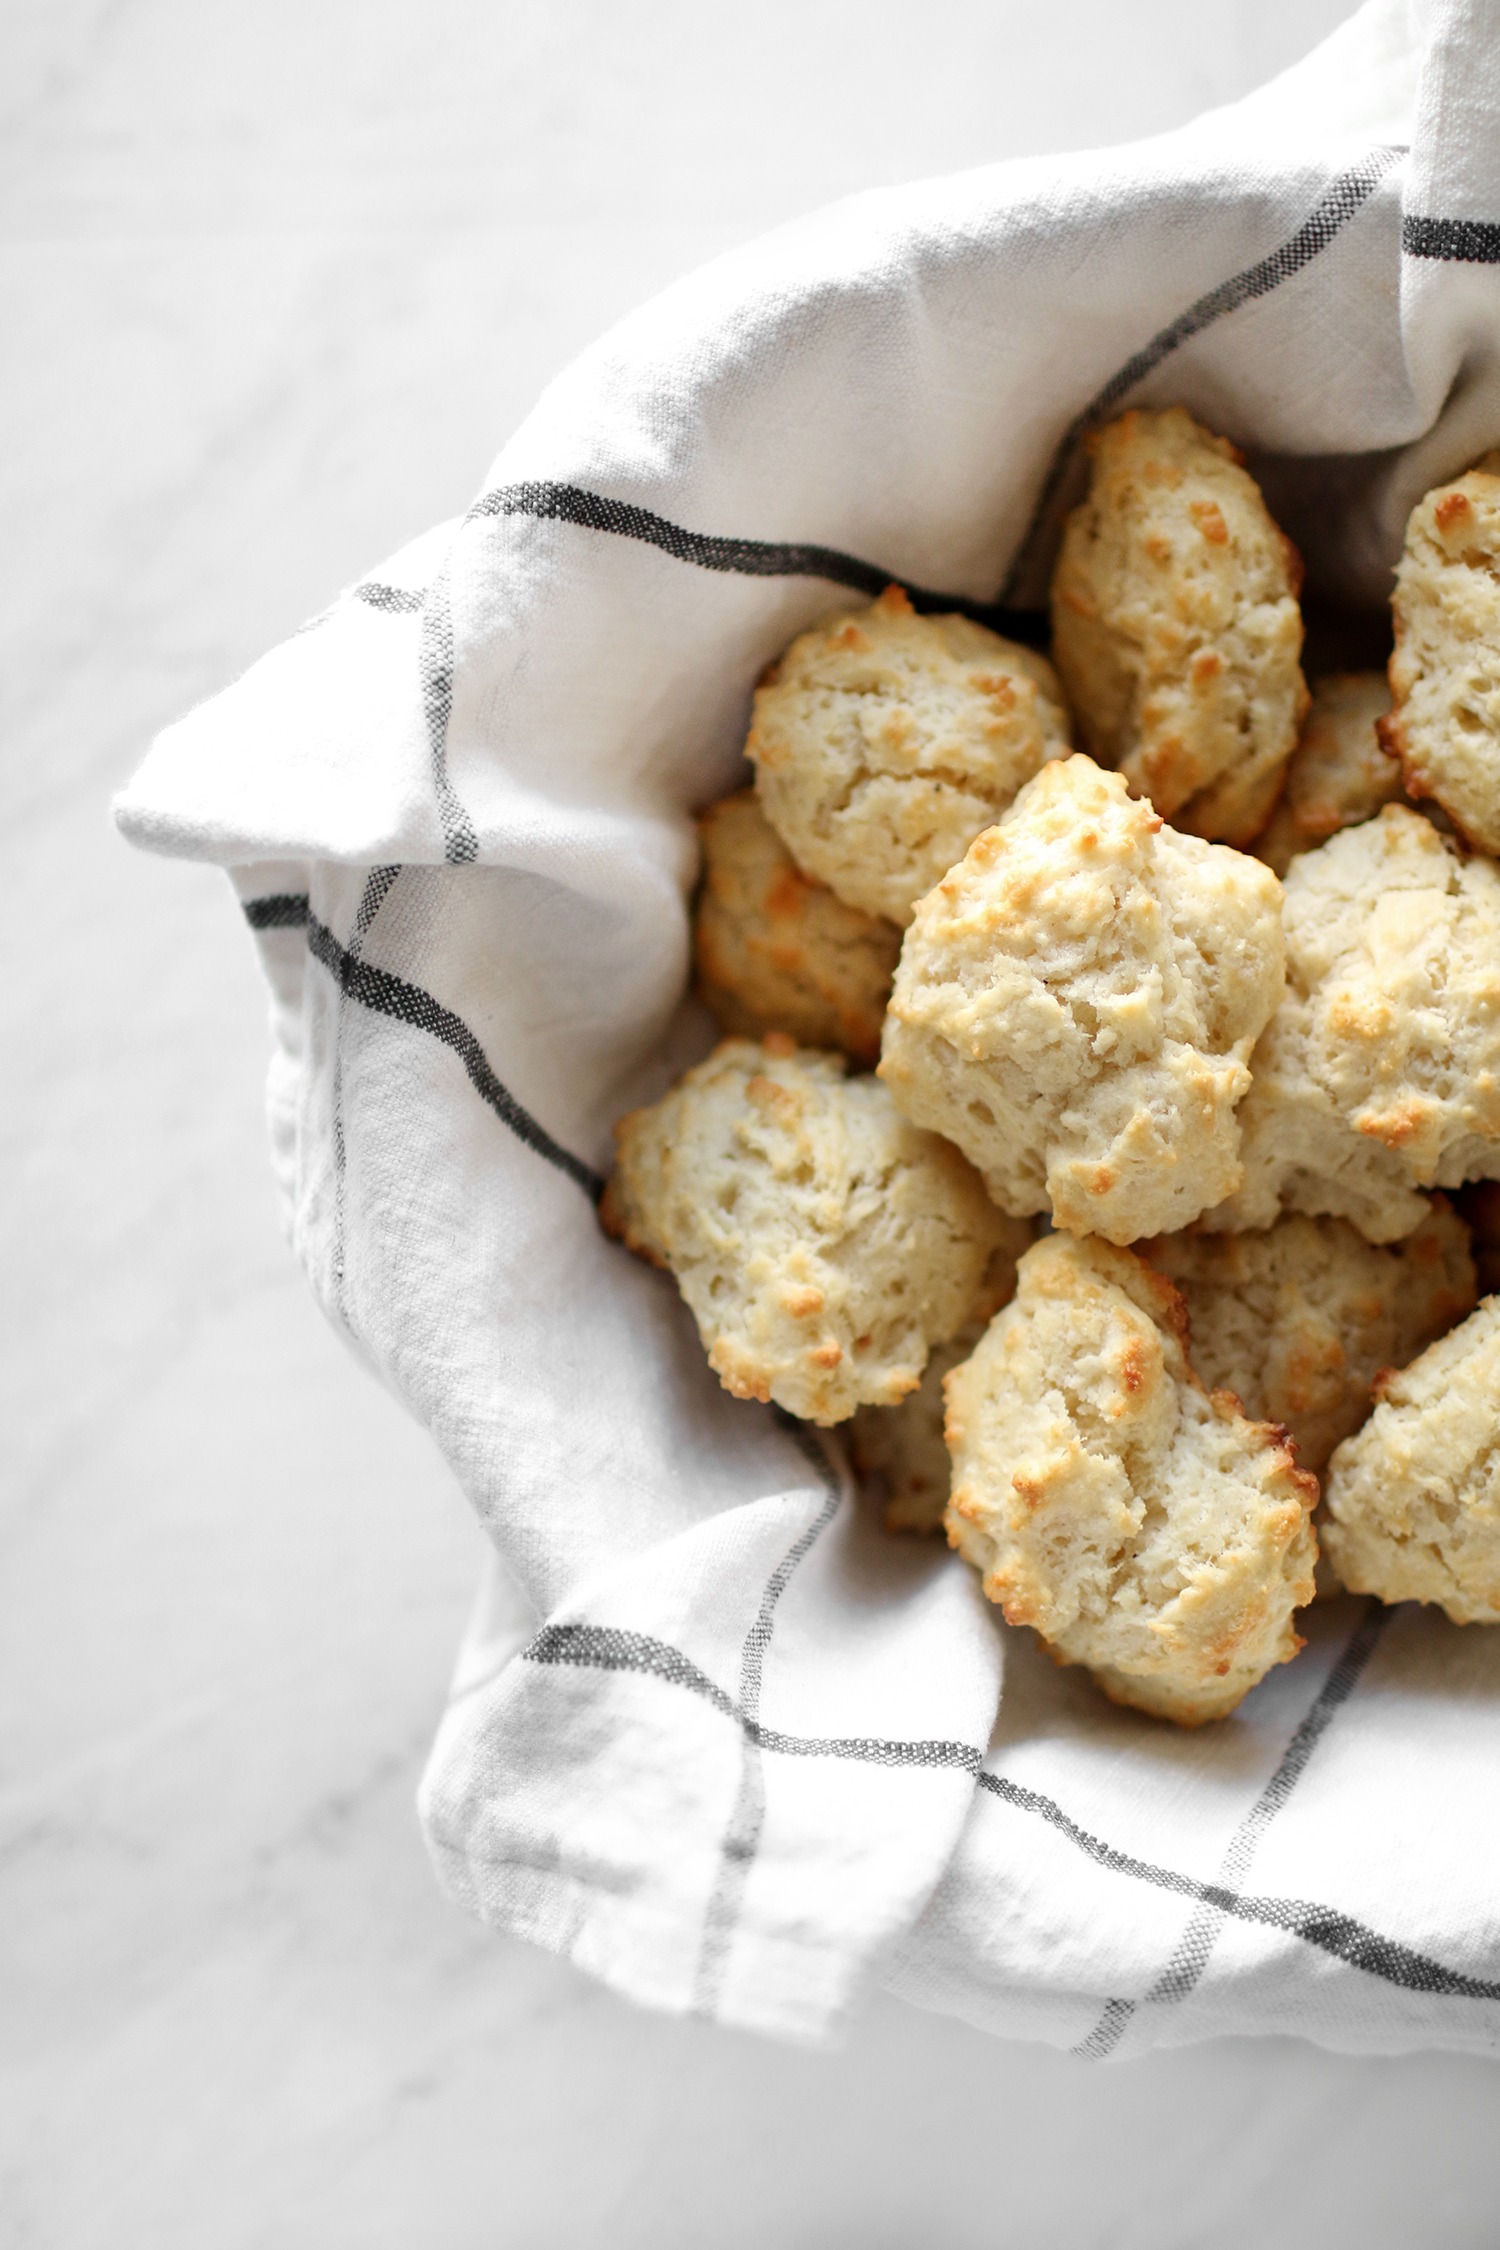 Easy and delicious four ingredient southern drop biscuits. You will love these especially since they are so quick and easy! Catch the recipe over at KaraLayne.com!